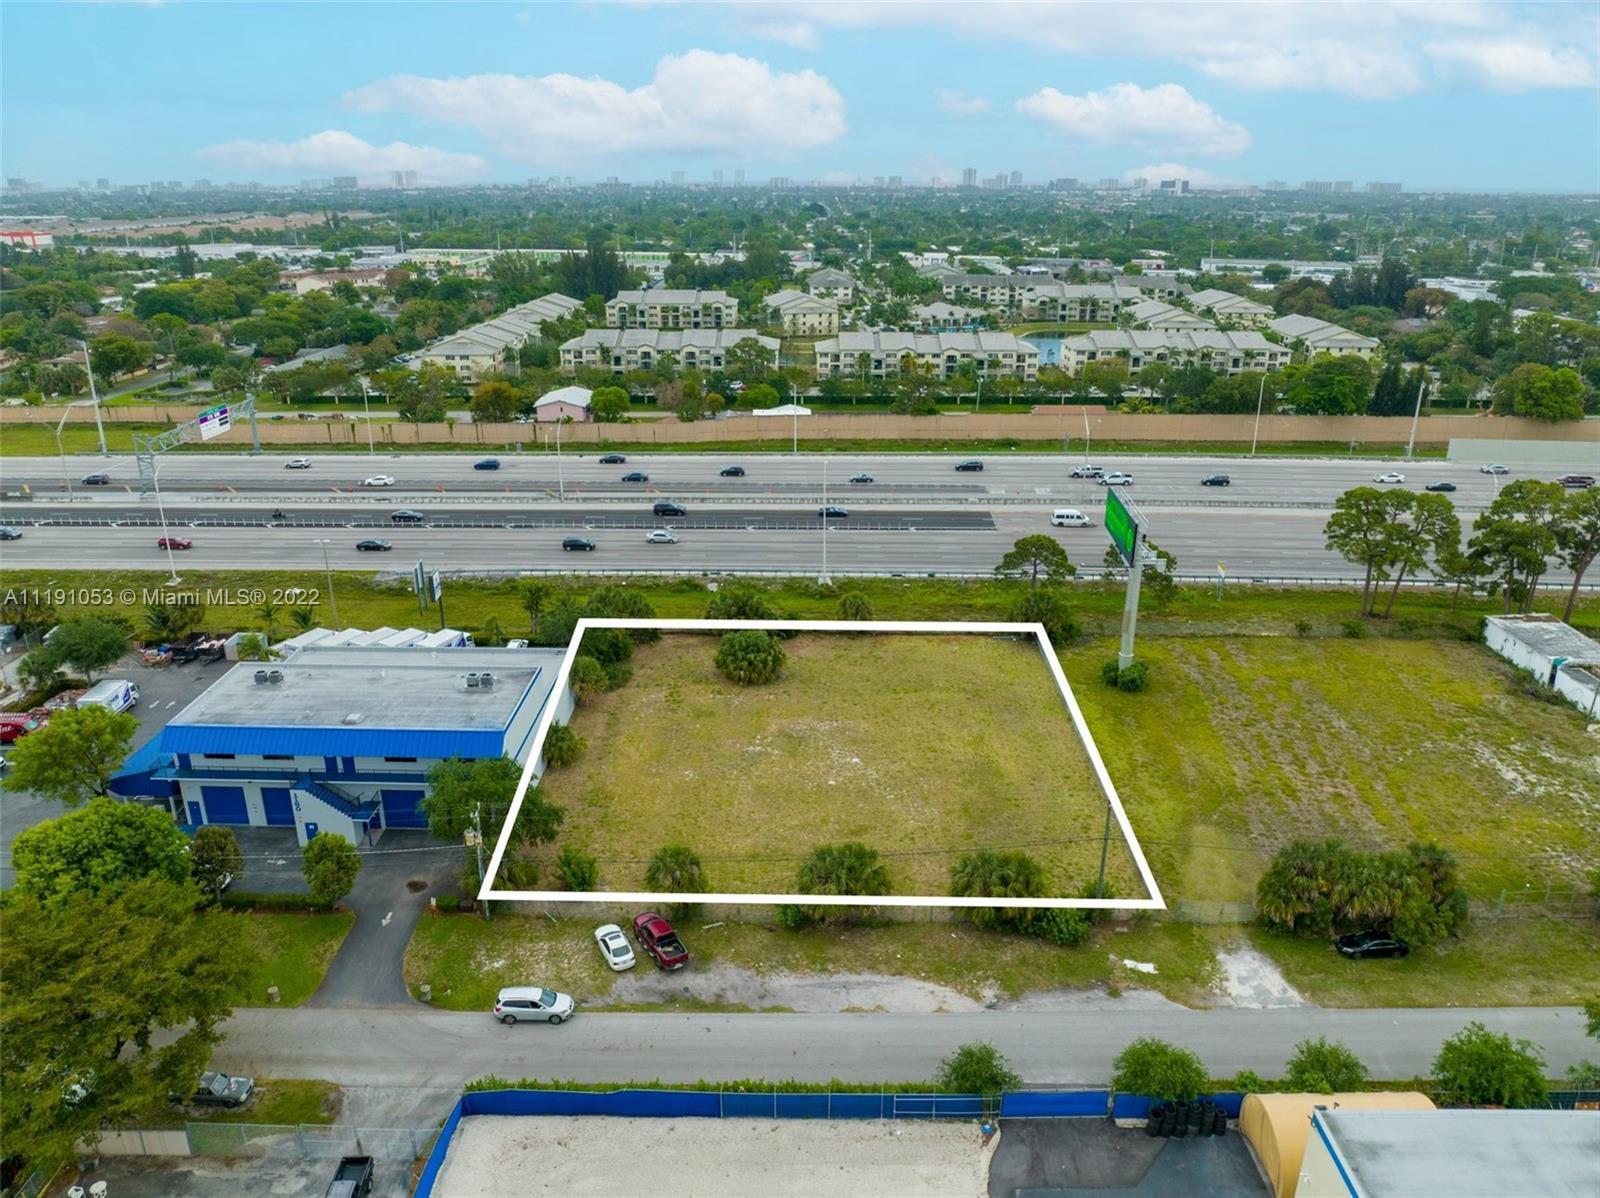 FOR LEASE - Amazing opportunity will build to suit. 28,000 sq ft lot. Can build up to a 5000 square-foot building with ample parking,I1 zoned,I95 Frontage on a great street.